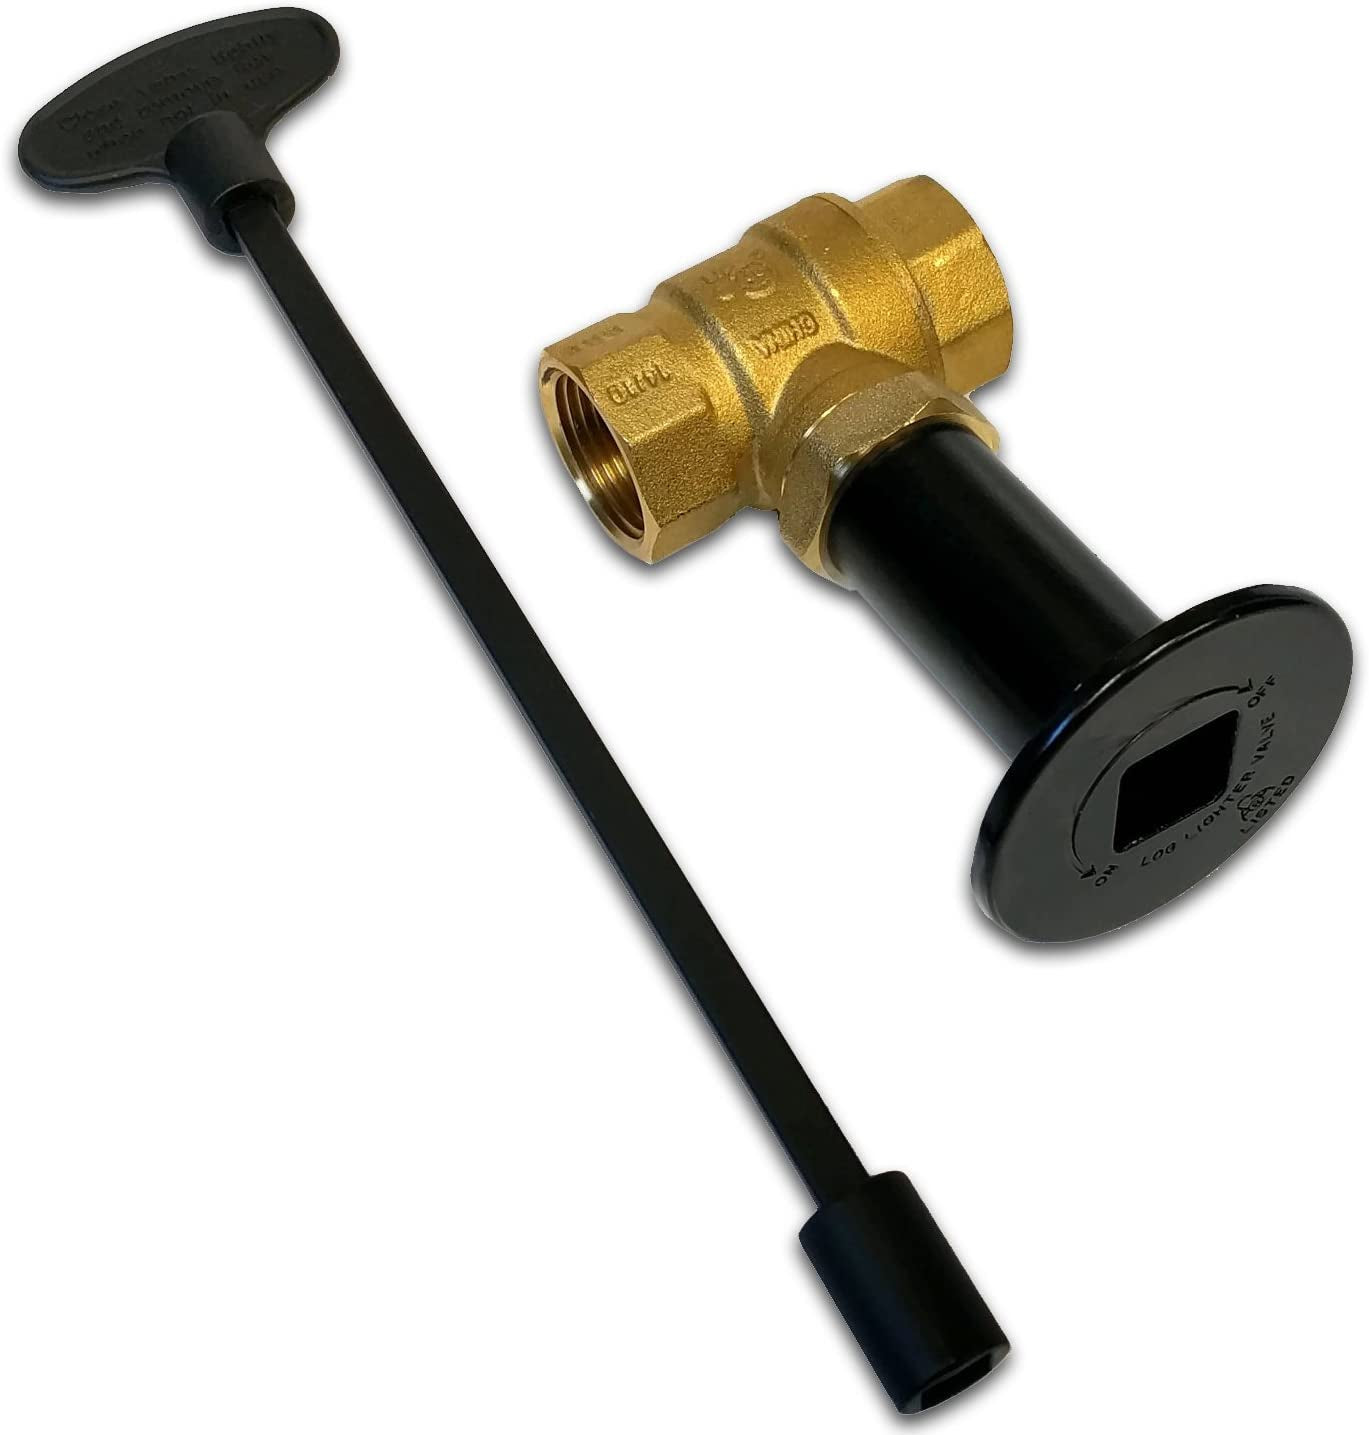 Midwest Hearth, Midwest Hearth Gas Fire Pit Key Valve Kit - 3/4" NPT - Flat Black